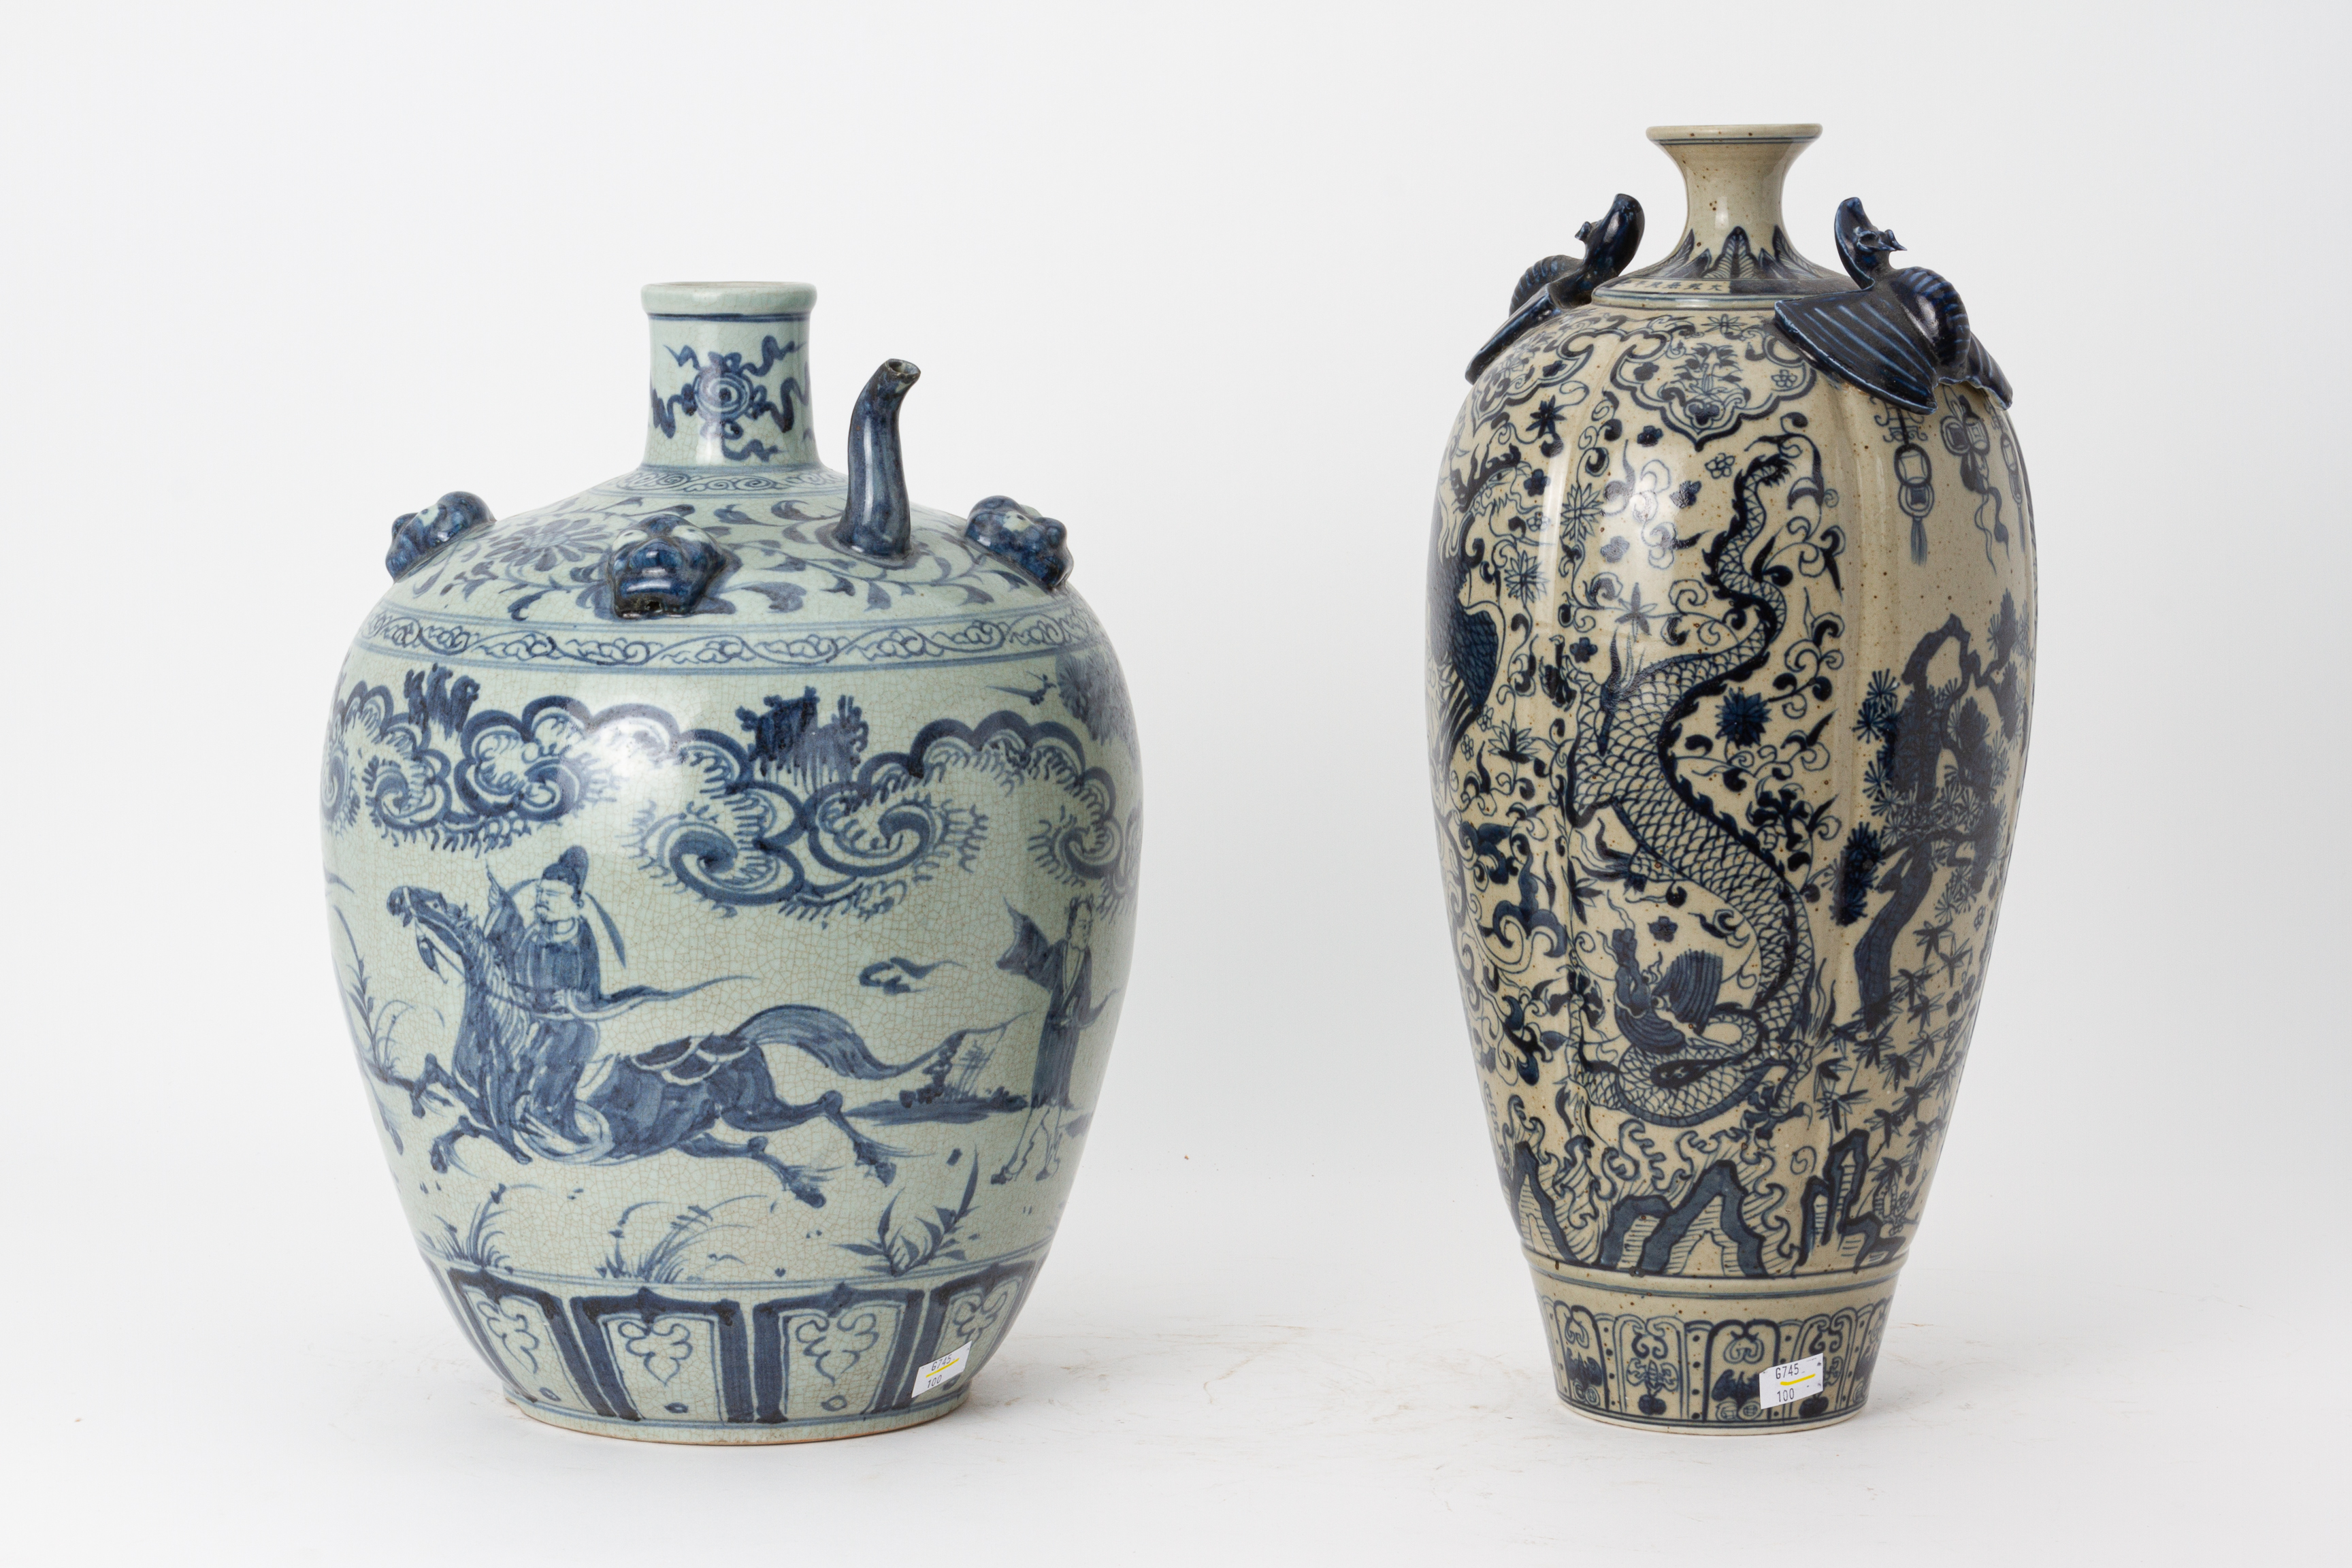 A LARGE BLUE AND WHITE VESSEL AND A FLUTED VASE - Image 2 of 3